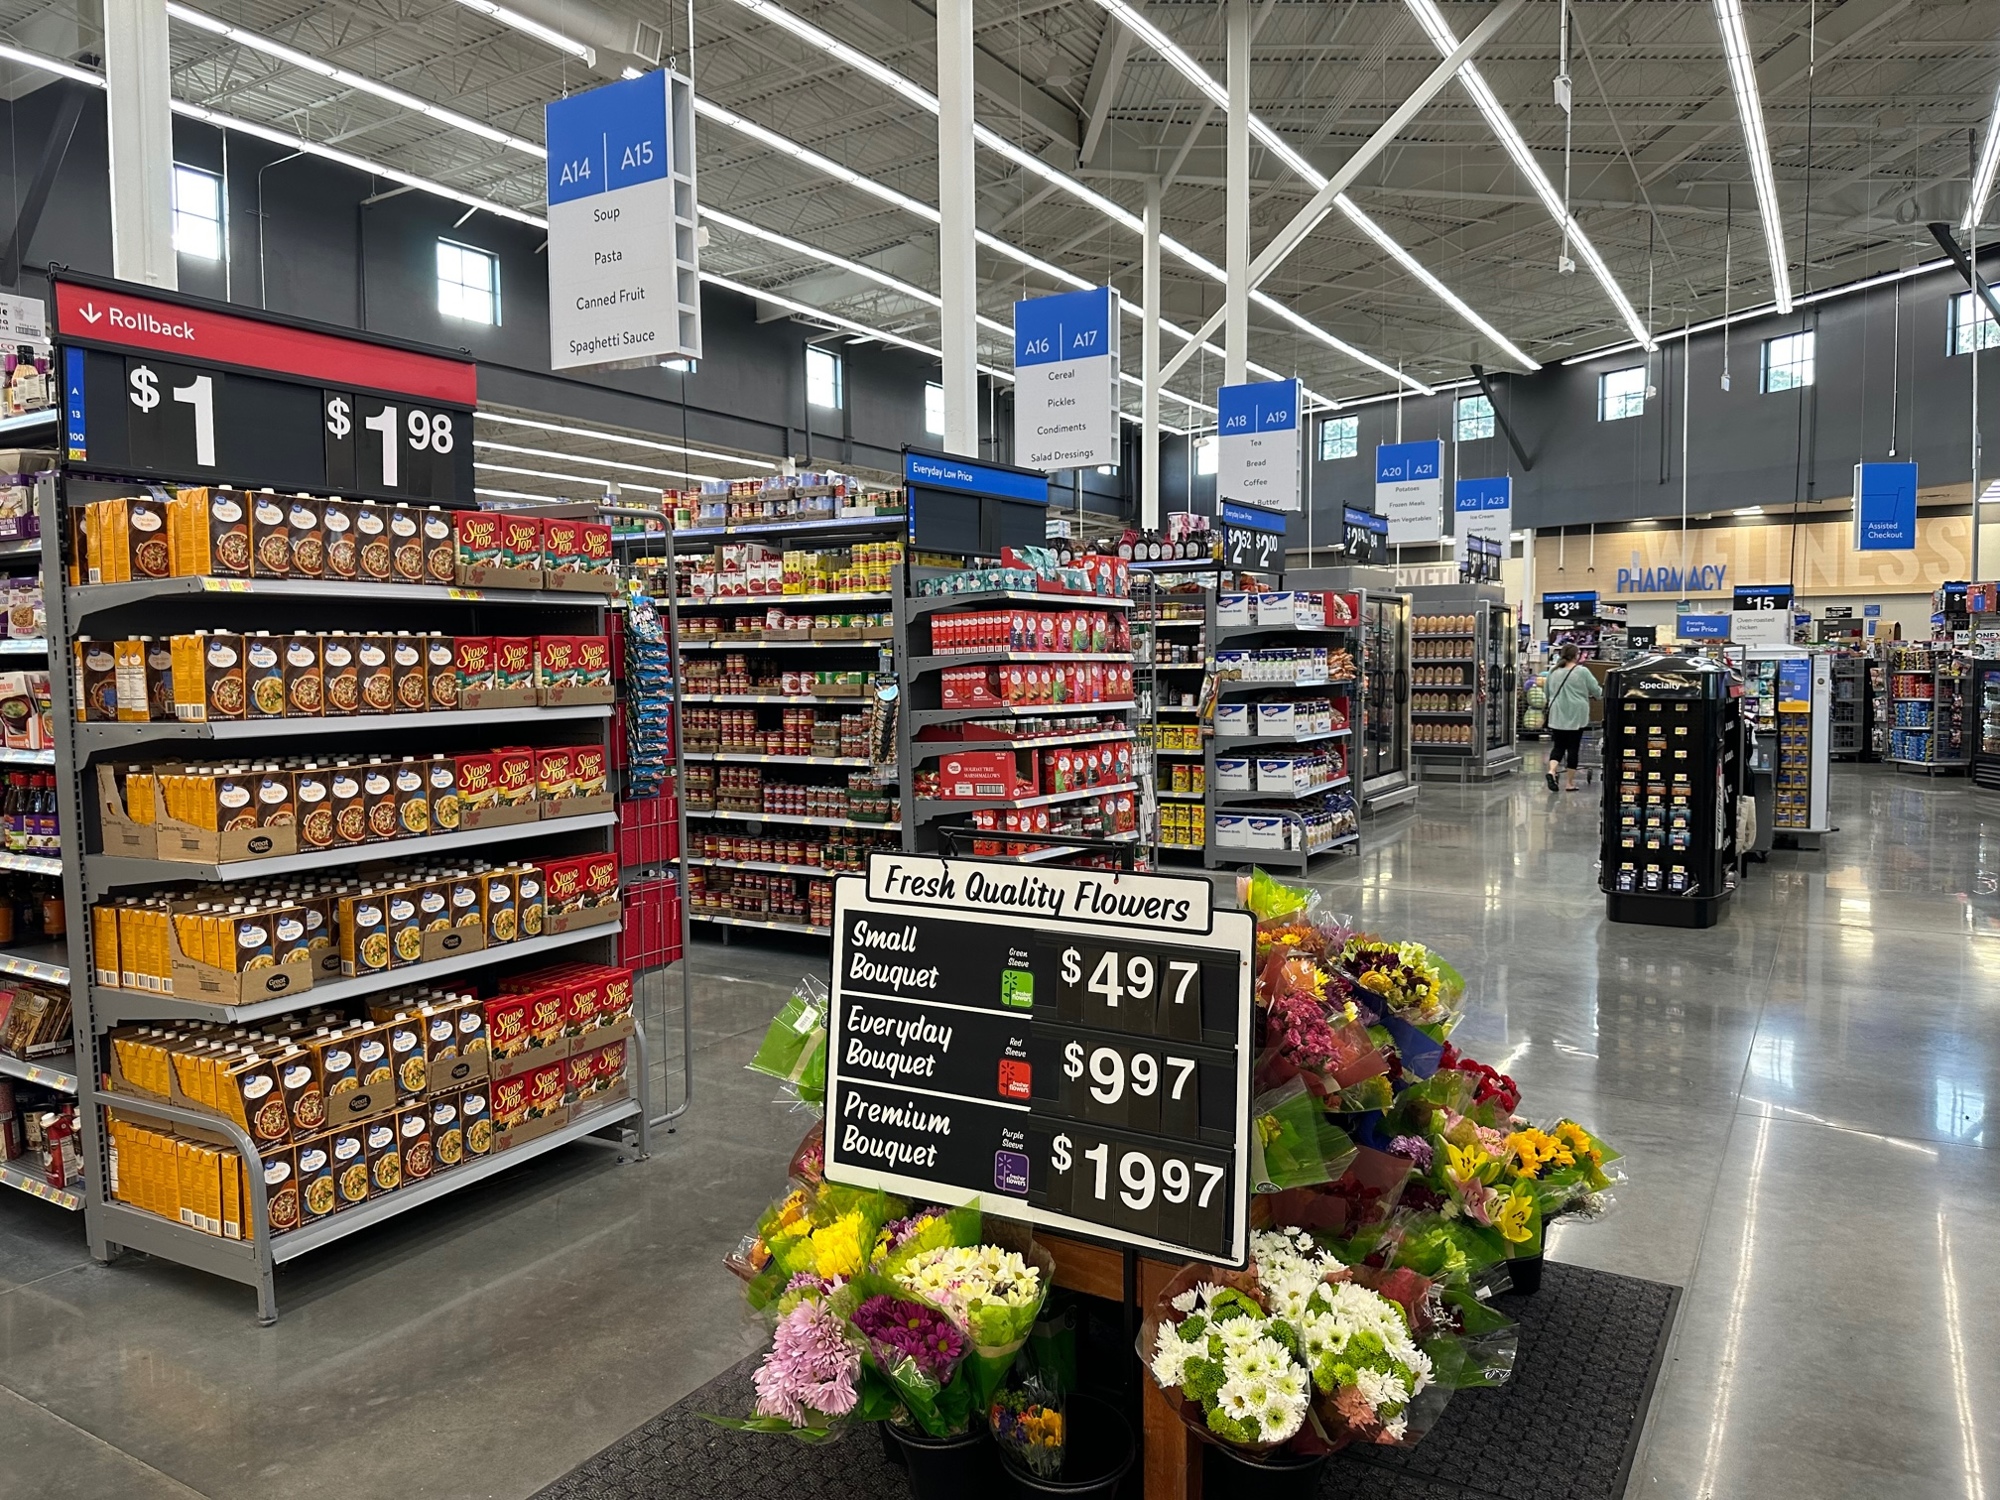 Walmart recently completed a $1.3 million renovation of its San Pablo Road Neighborhood Market and proposes a similar remodeling of its Baymeadows Road store.